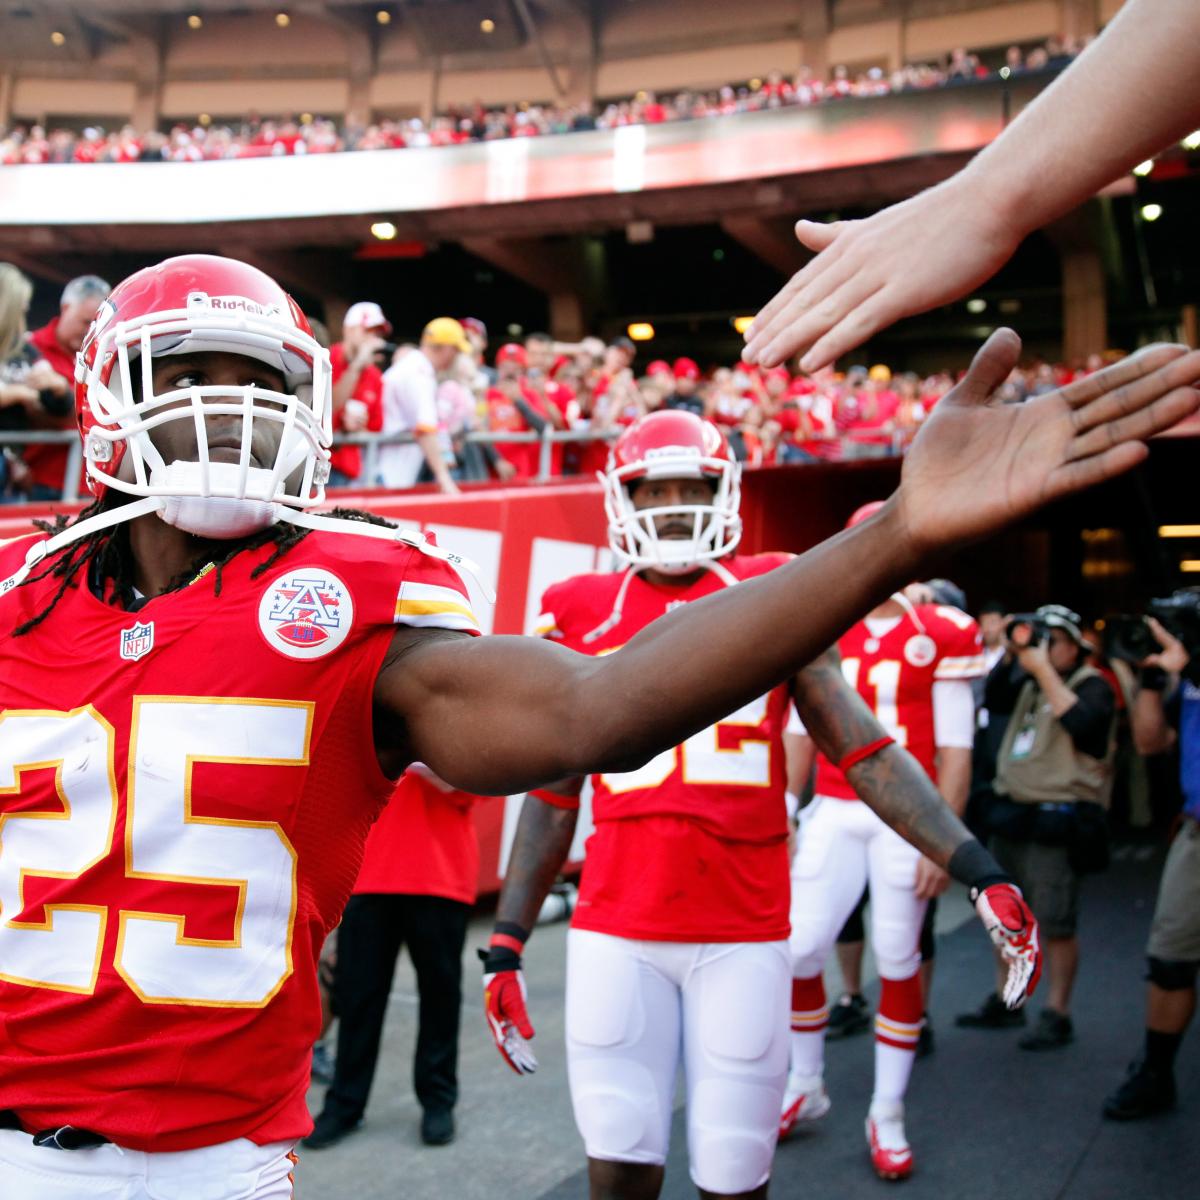 2014 Kansas City Chiefs Schedule Full Listing of Dates, Times and TV